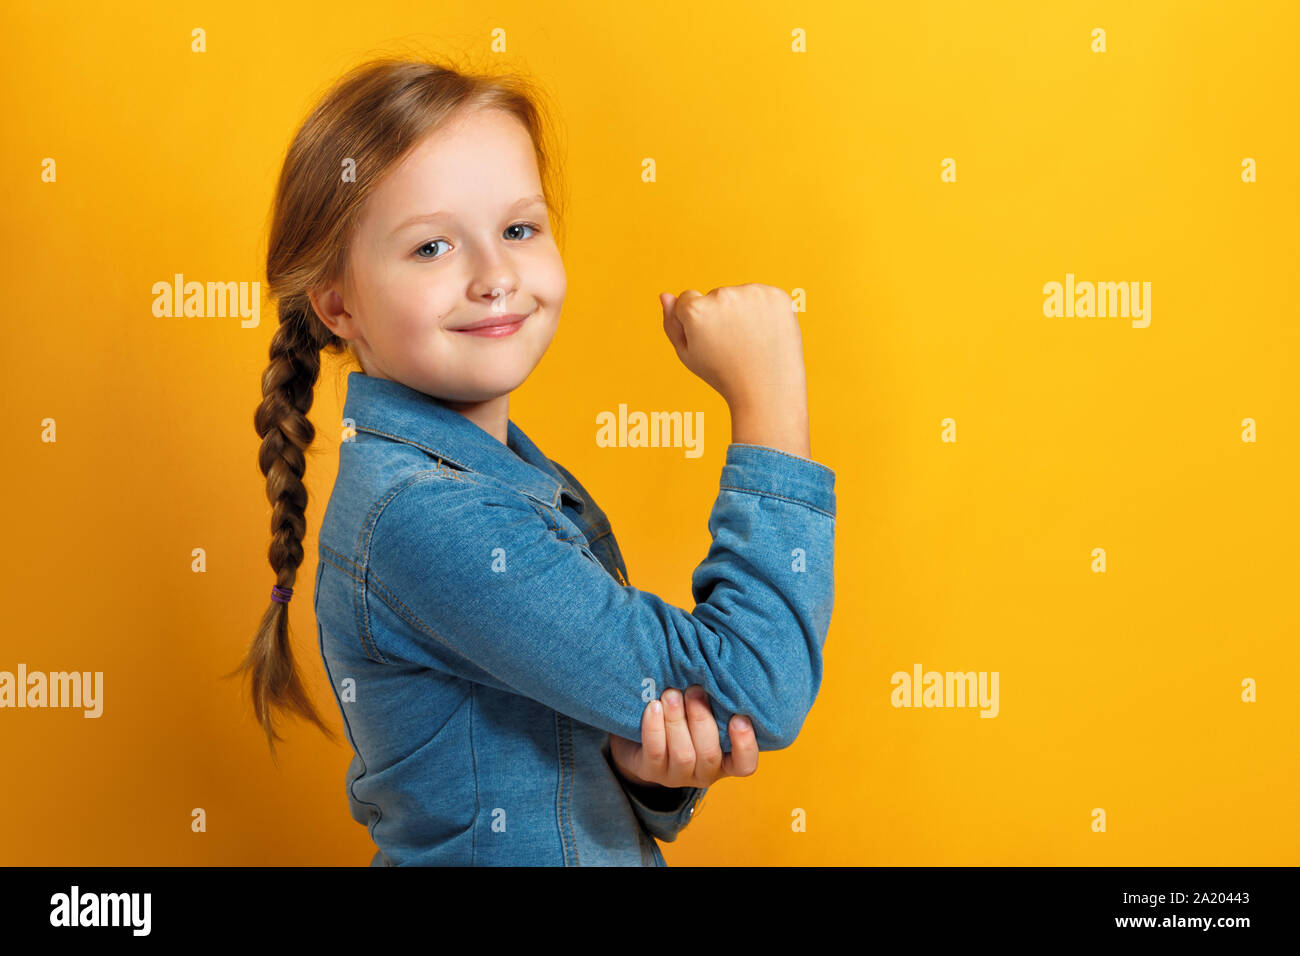 Closeup portrait of a little girl on a yellow background. Children's hand shows biceps. Girl power concept Stock Photo